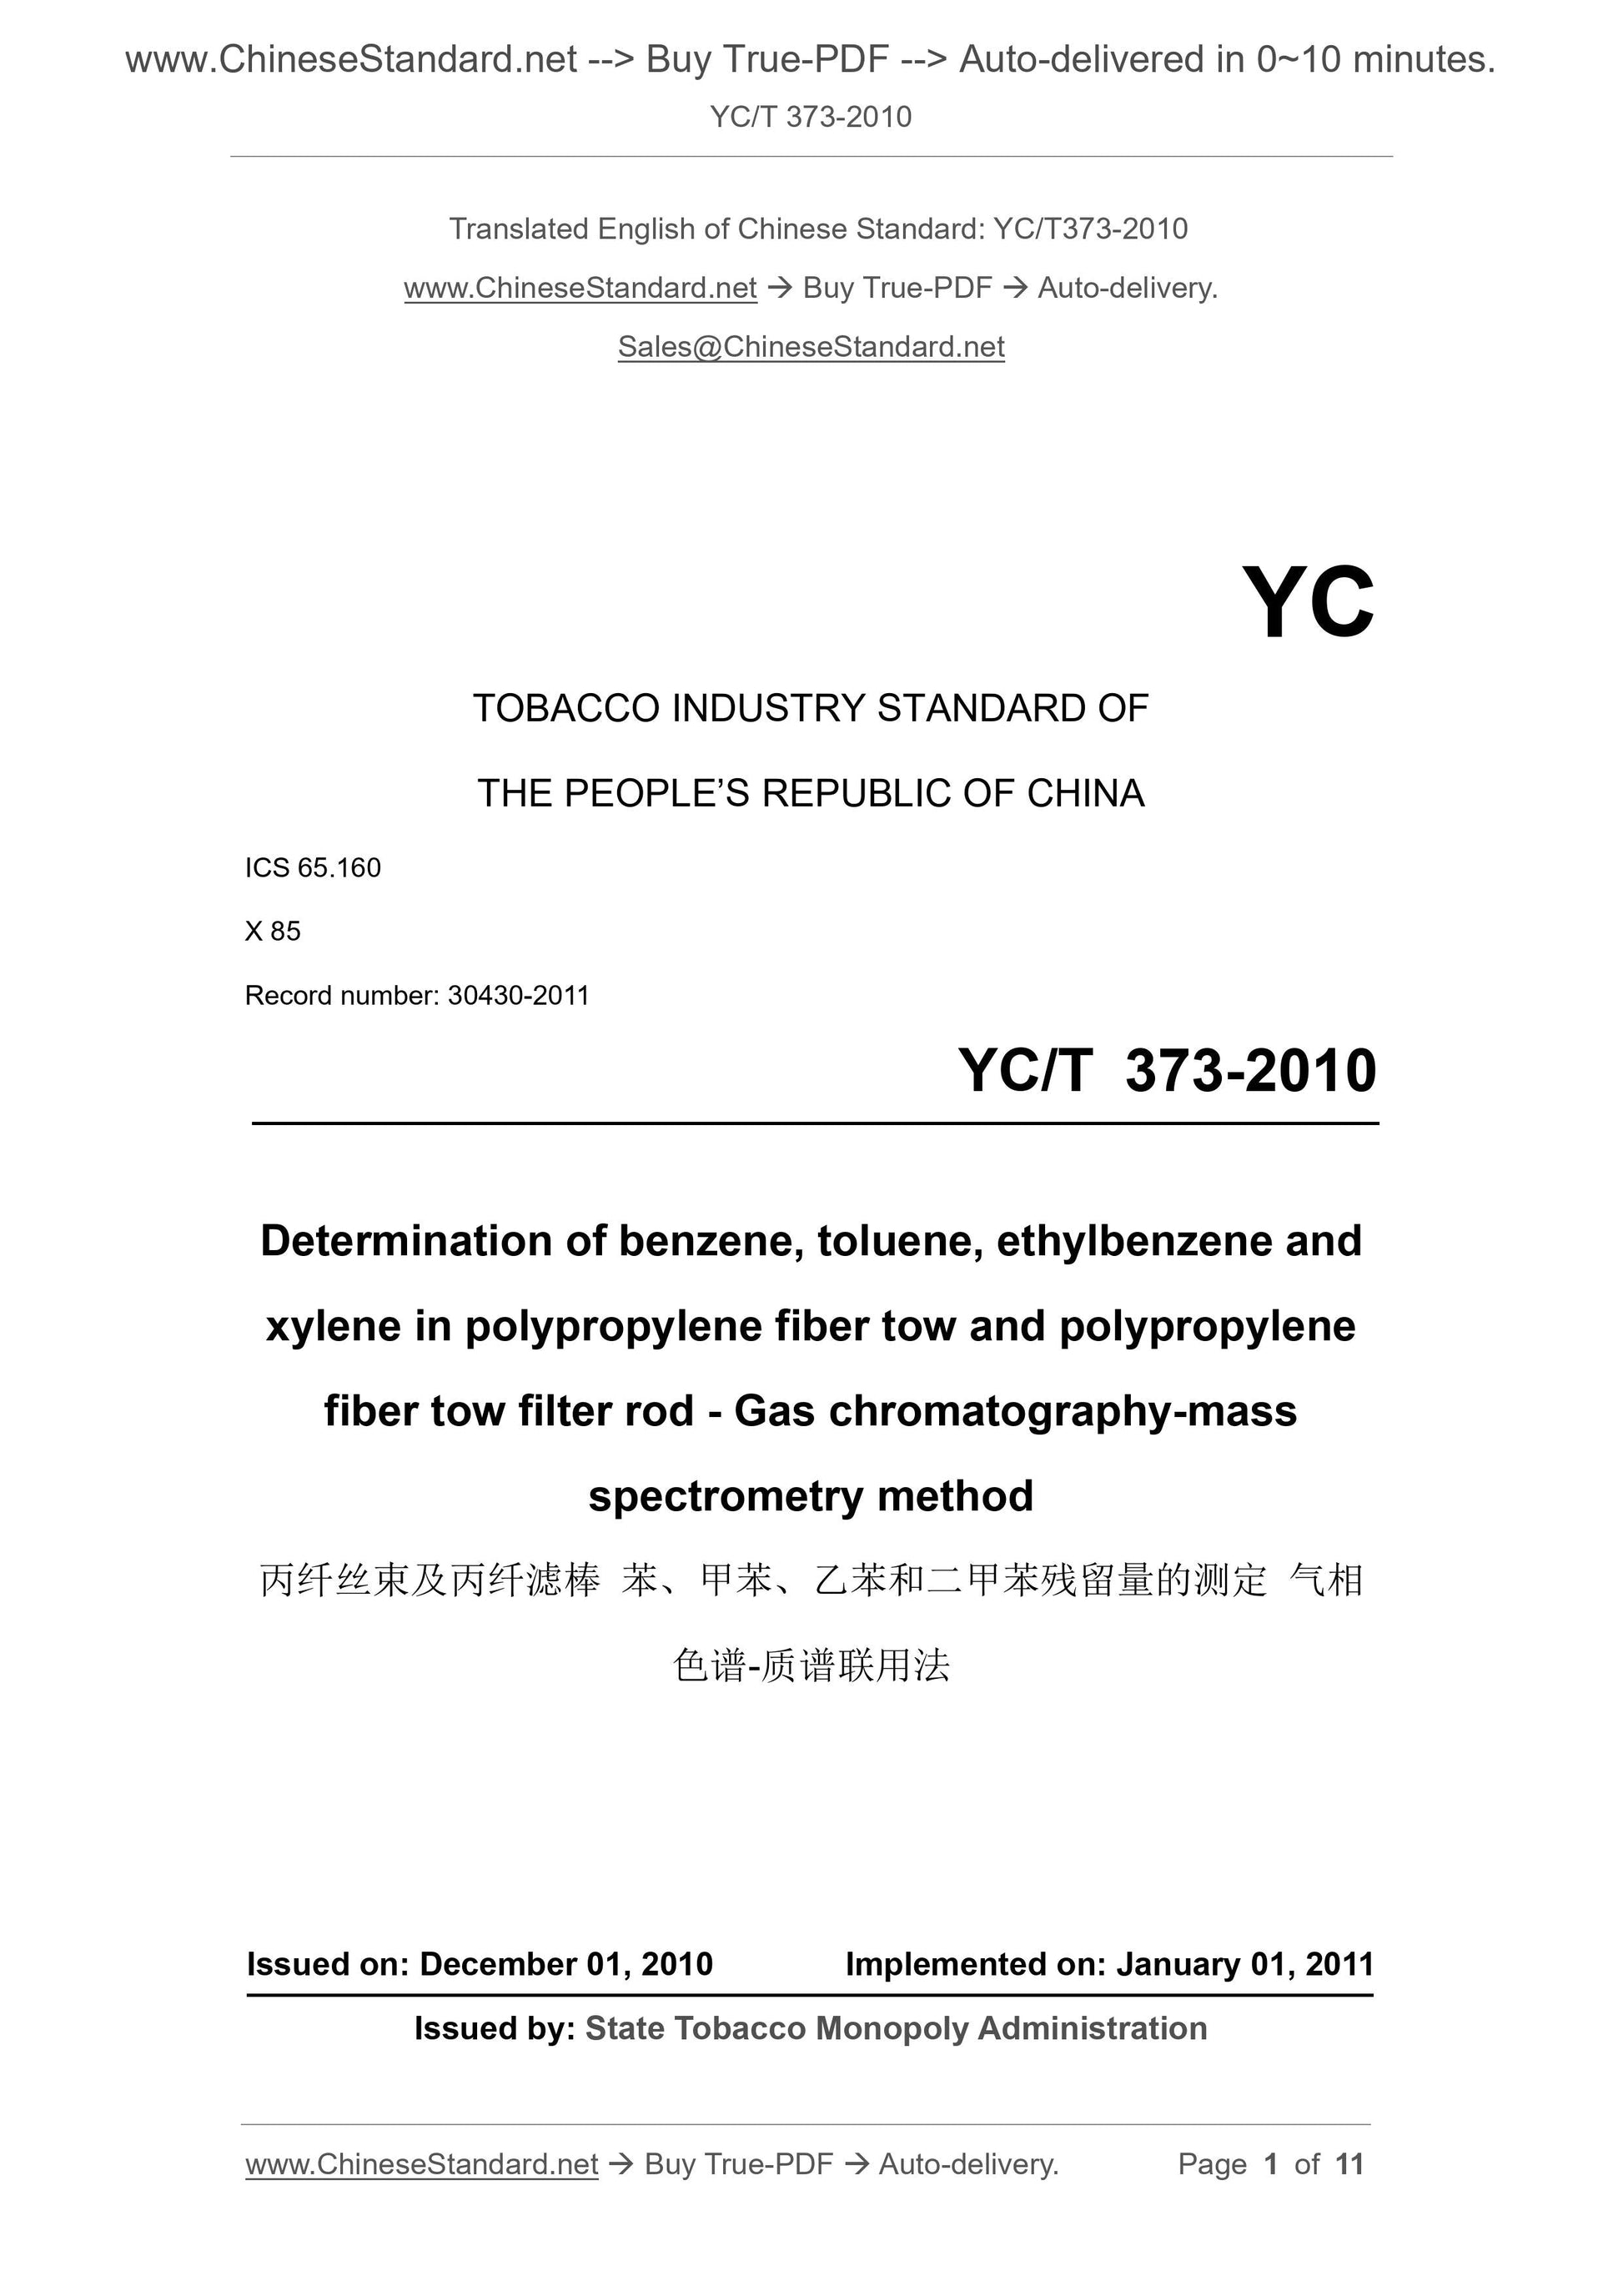 YC/T 373-2010 Page 1